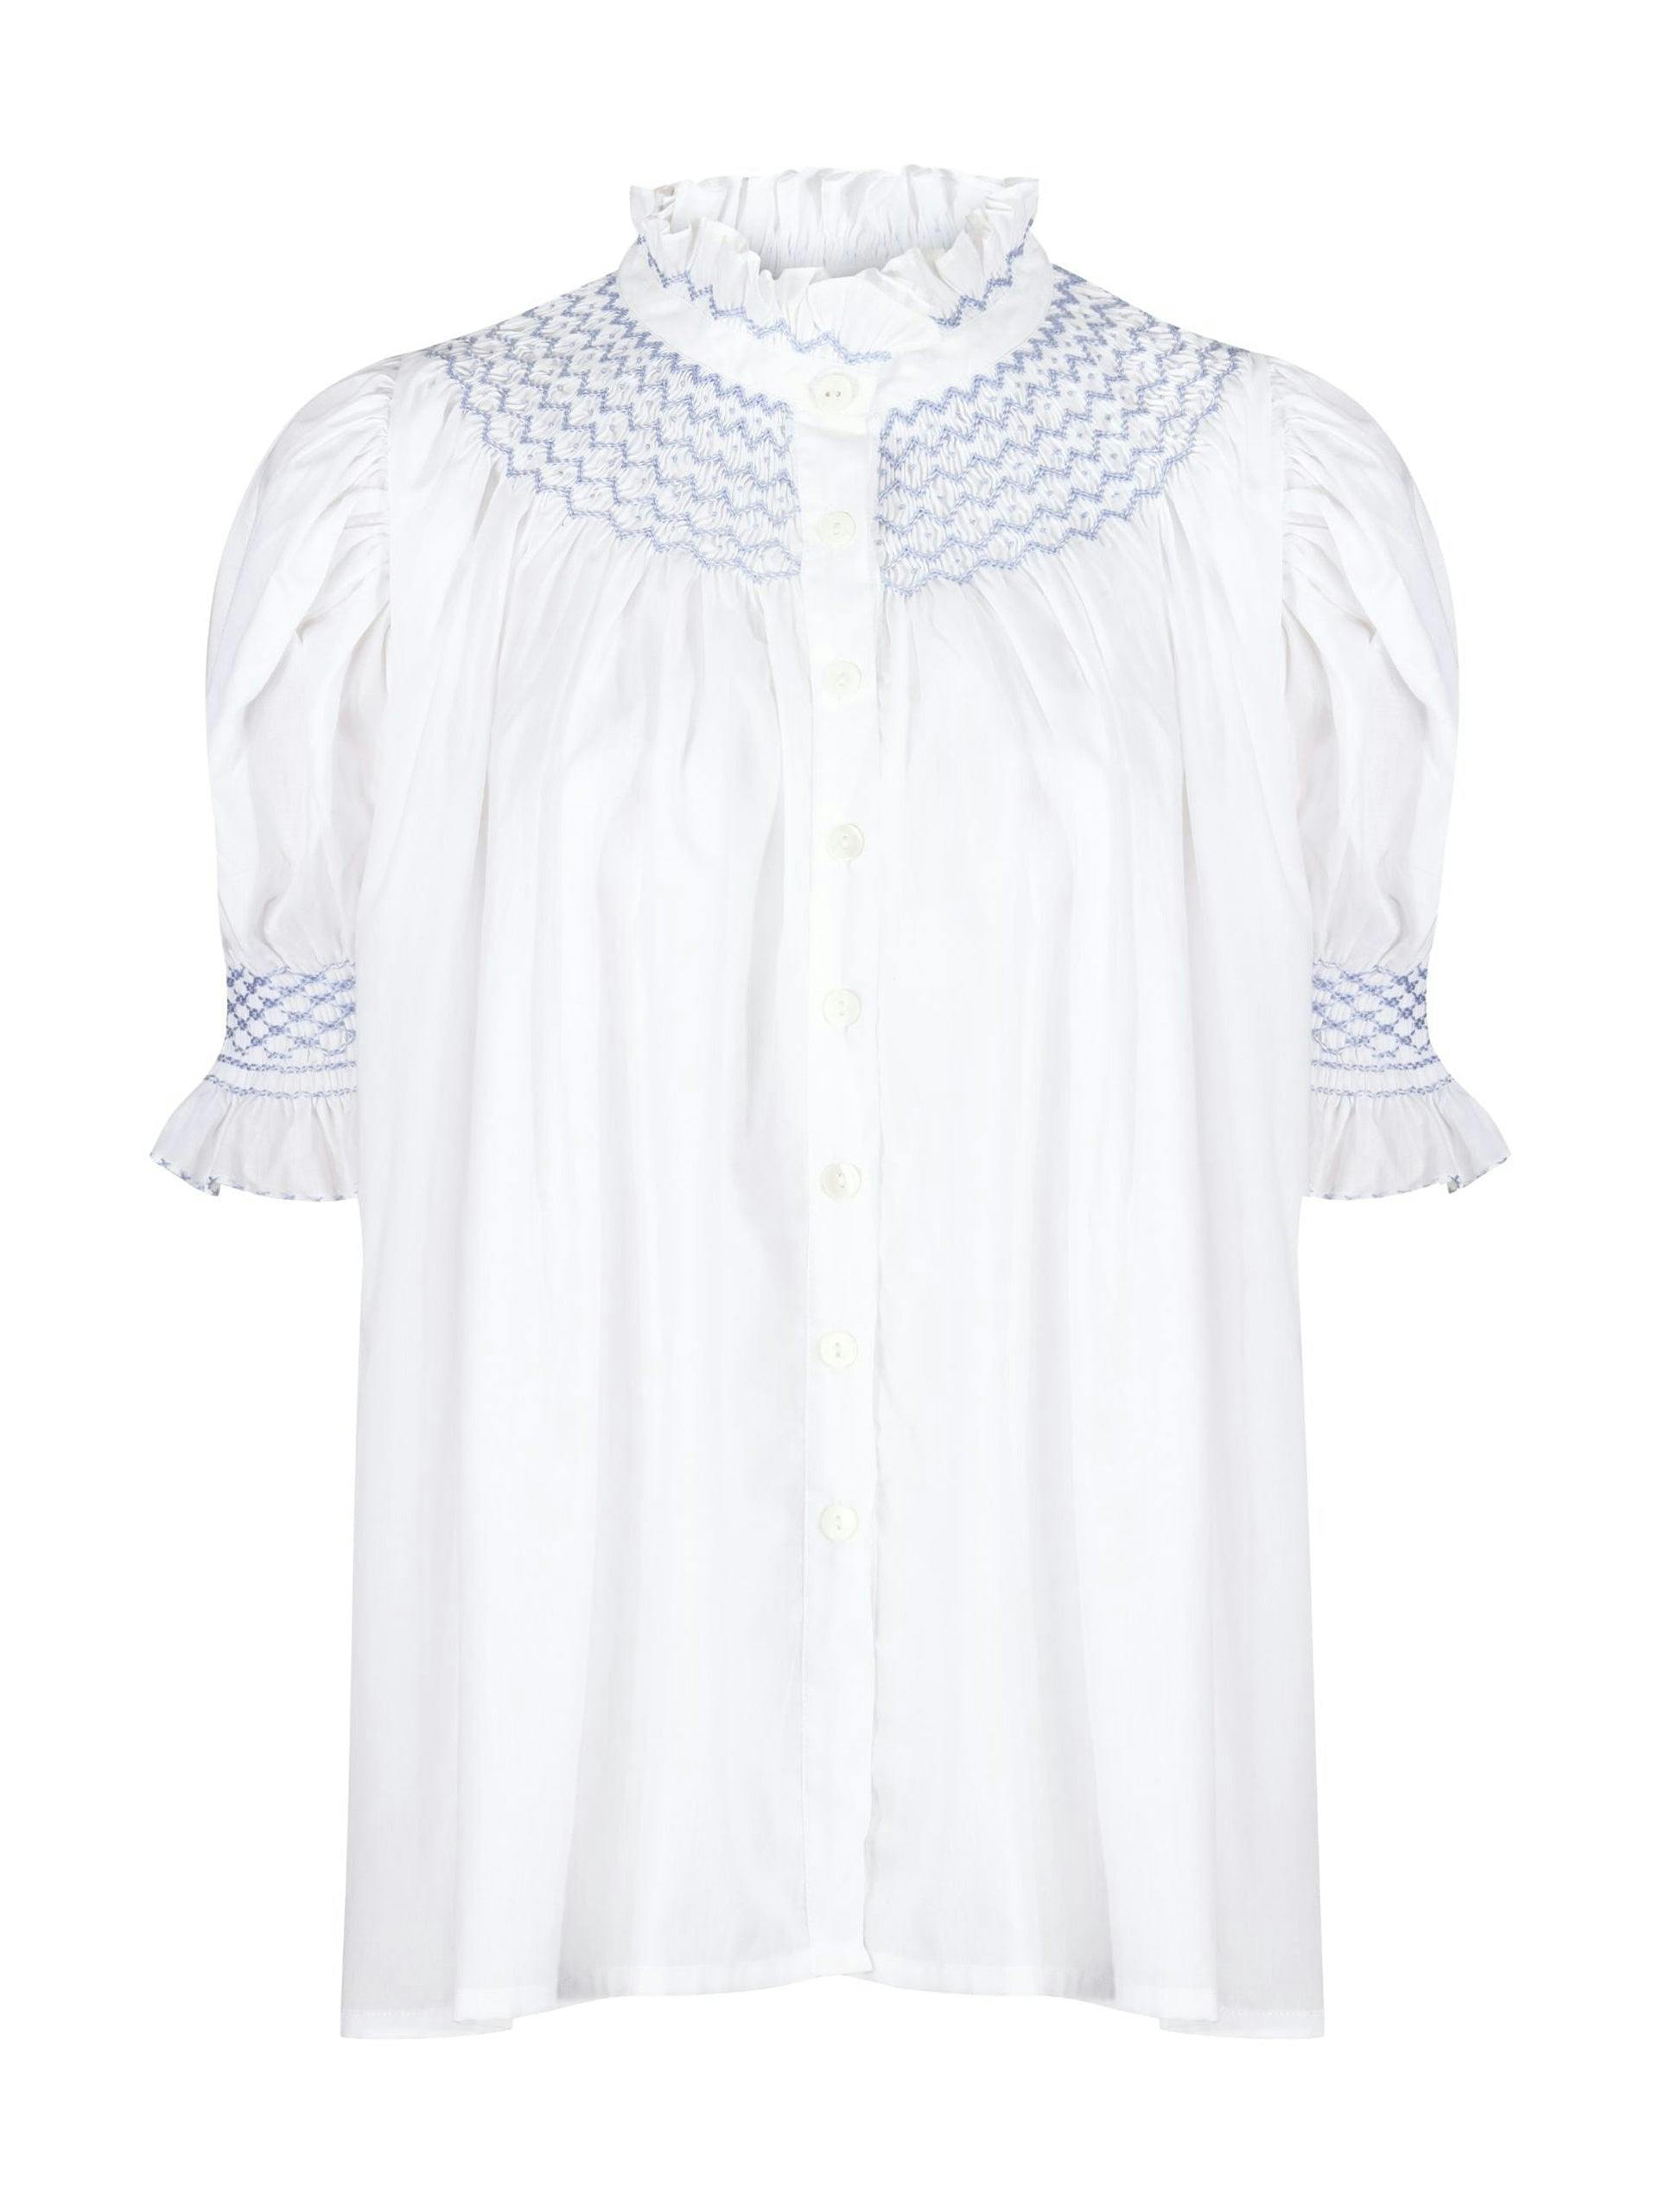 Scholl women's wummer blouse white with forget me not hand smocking